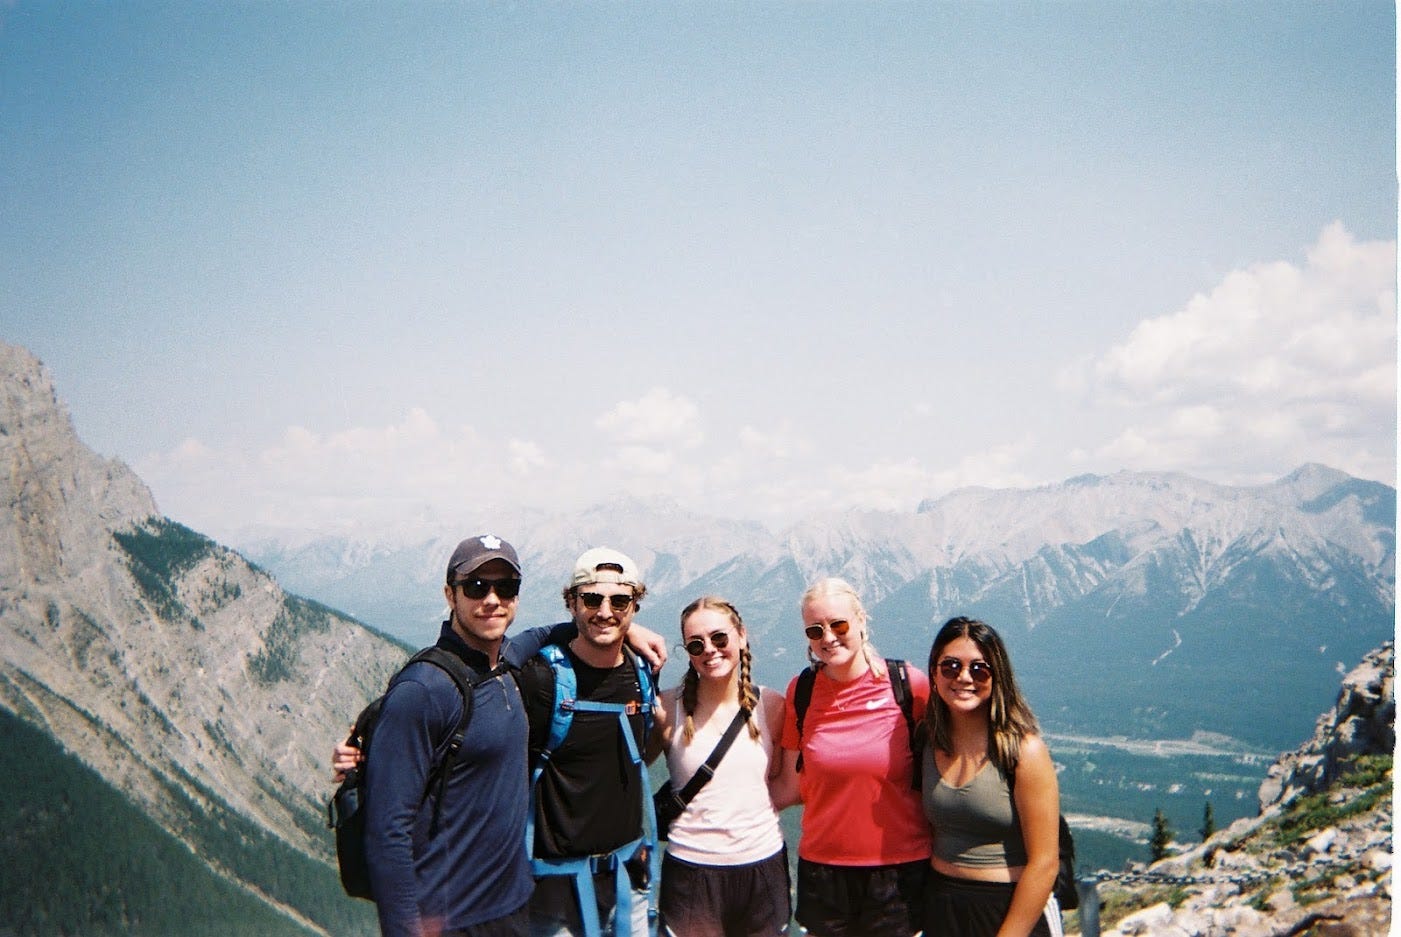 Hiking Ha Ling Peak in the beautiful Canadian Rockies with friends last summer. Canmore, AB, Canada. June 2021.